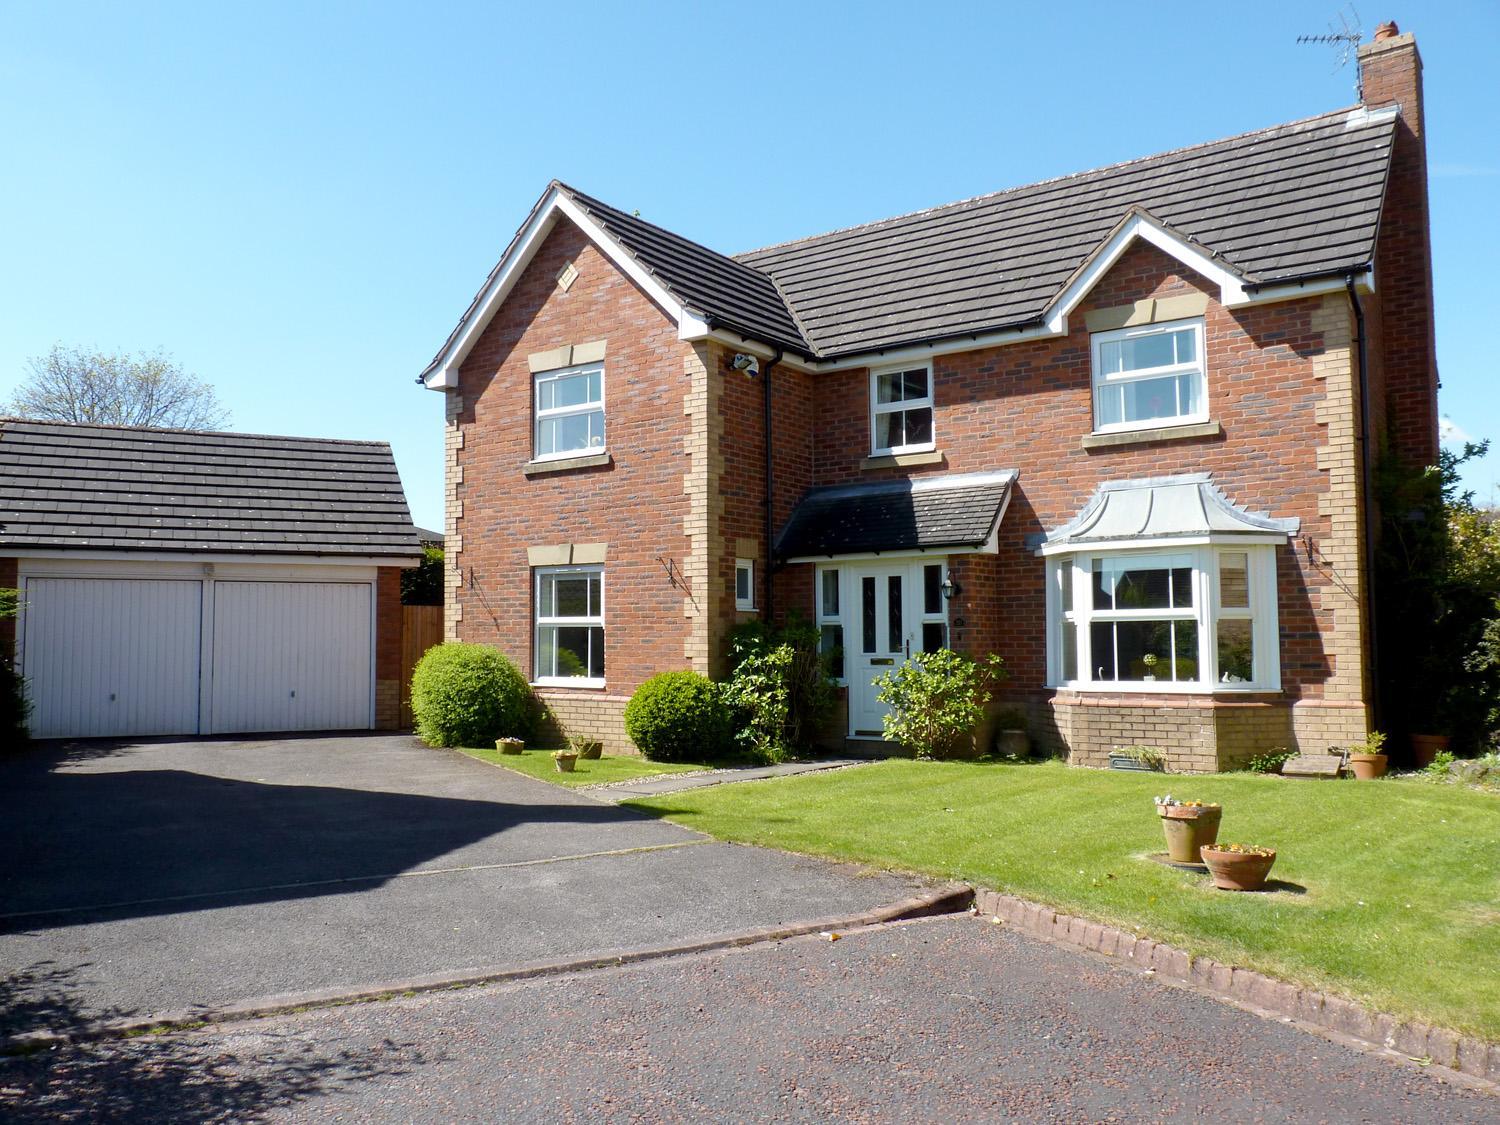 An extremely well presented, brick built, detached family property, situated in a sought after location at the head of a quiet cul-de-sac, to the favoured south side of Harrogate.